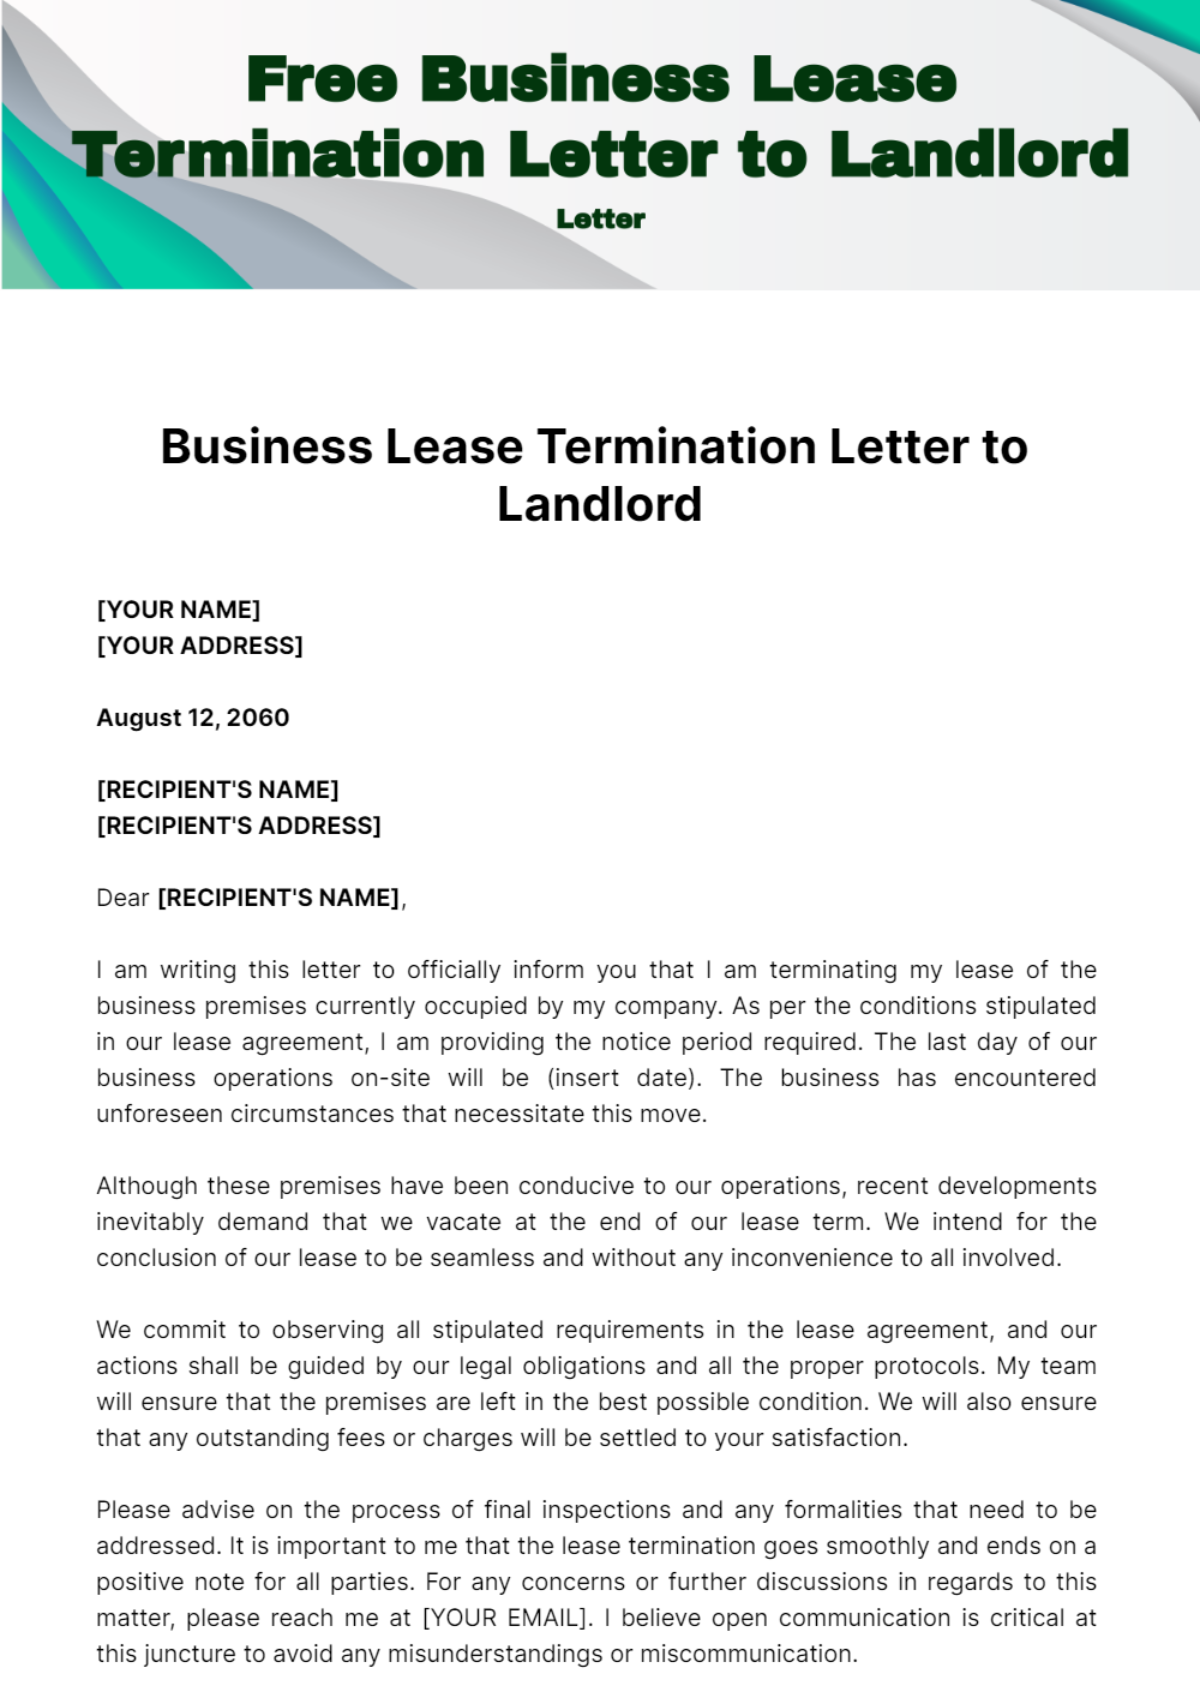 Free Business Lease Termination Letter to Landlord Template